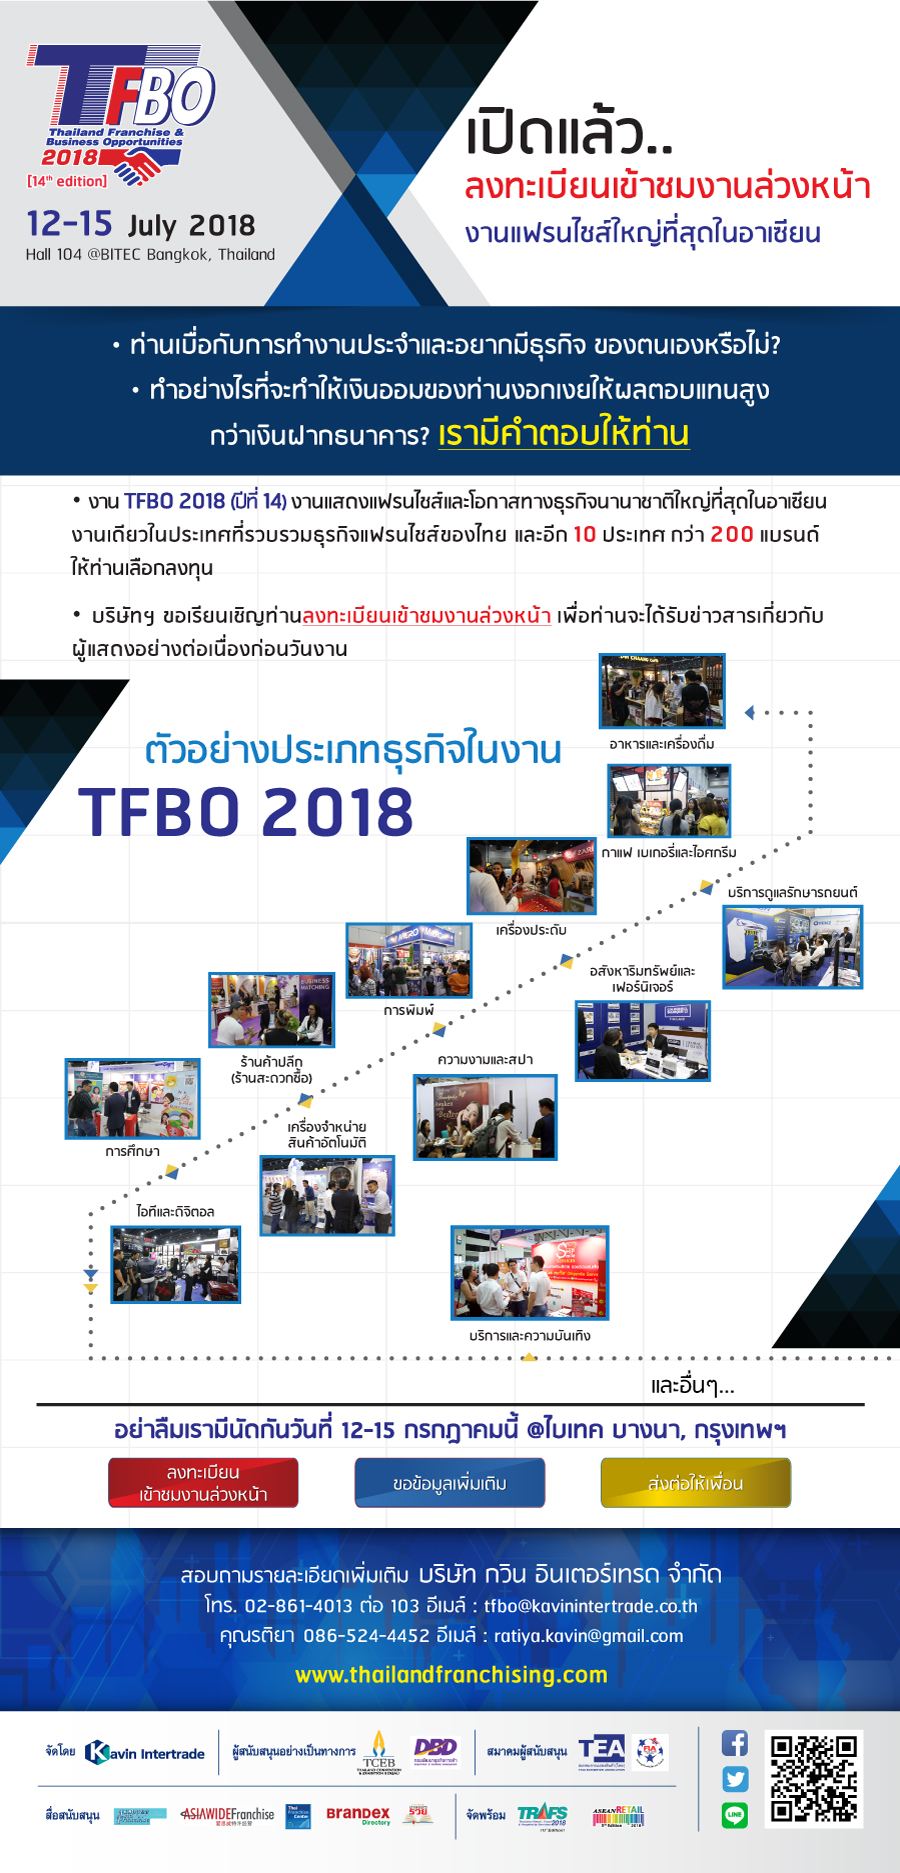 Thailand Franchise & Business Opportunity (TFBO), 14th edition